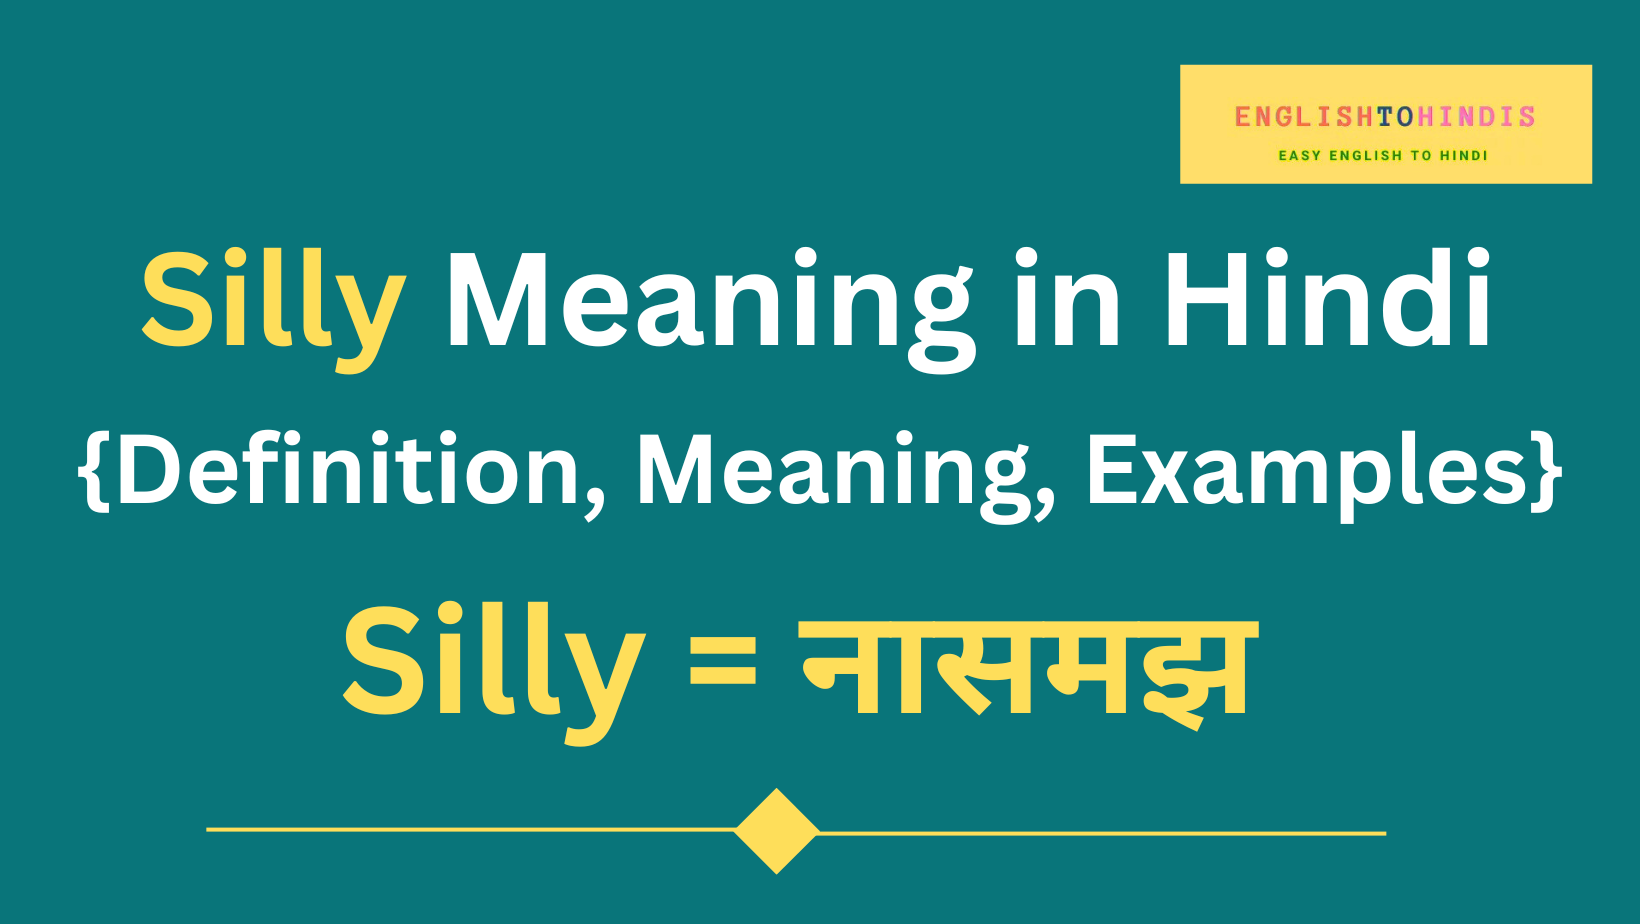 Silly Meaning in hindi